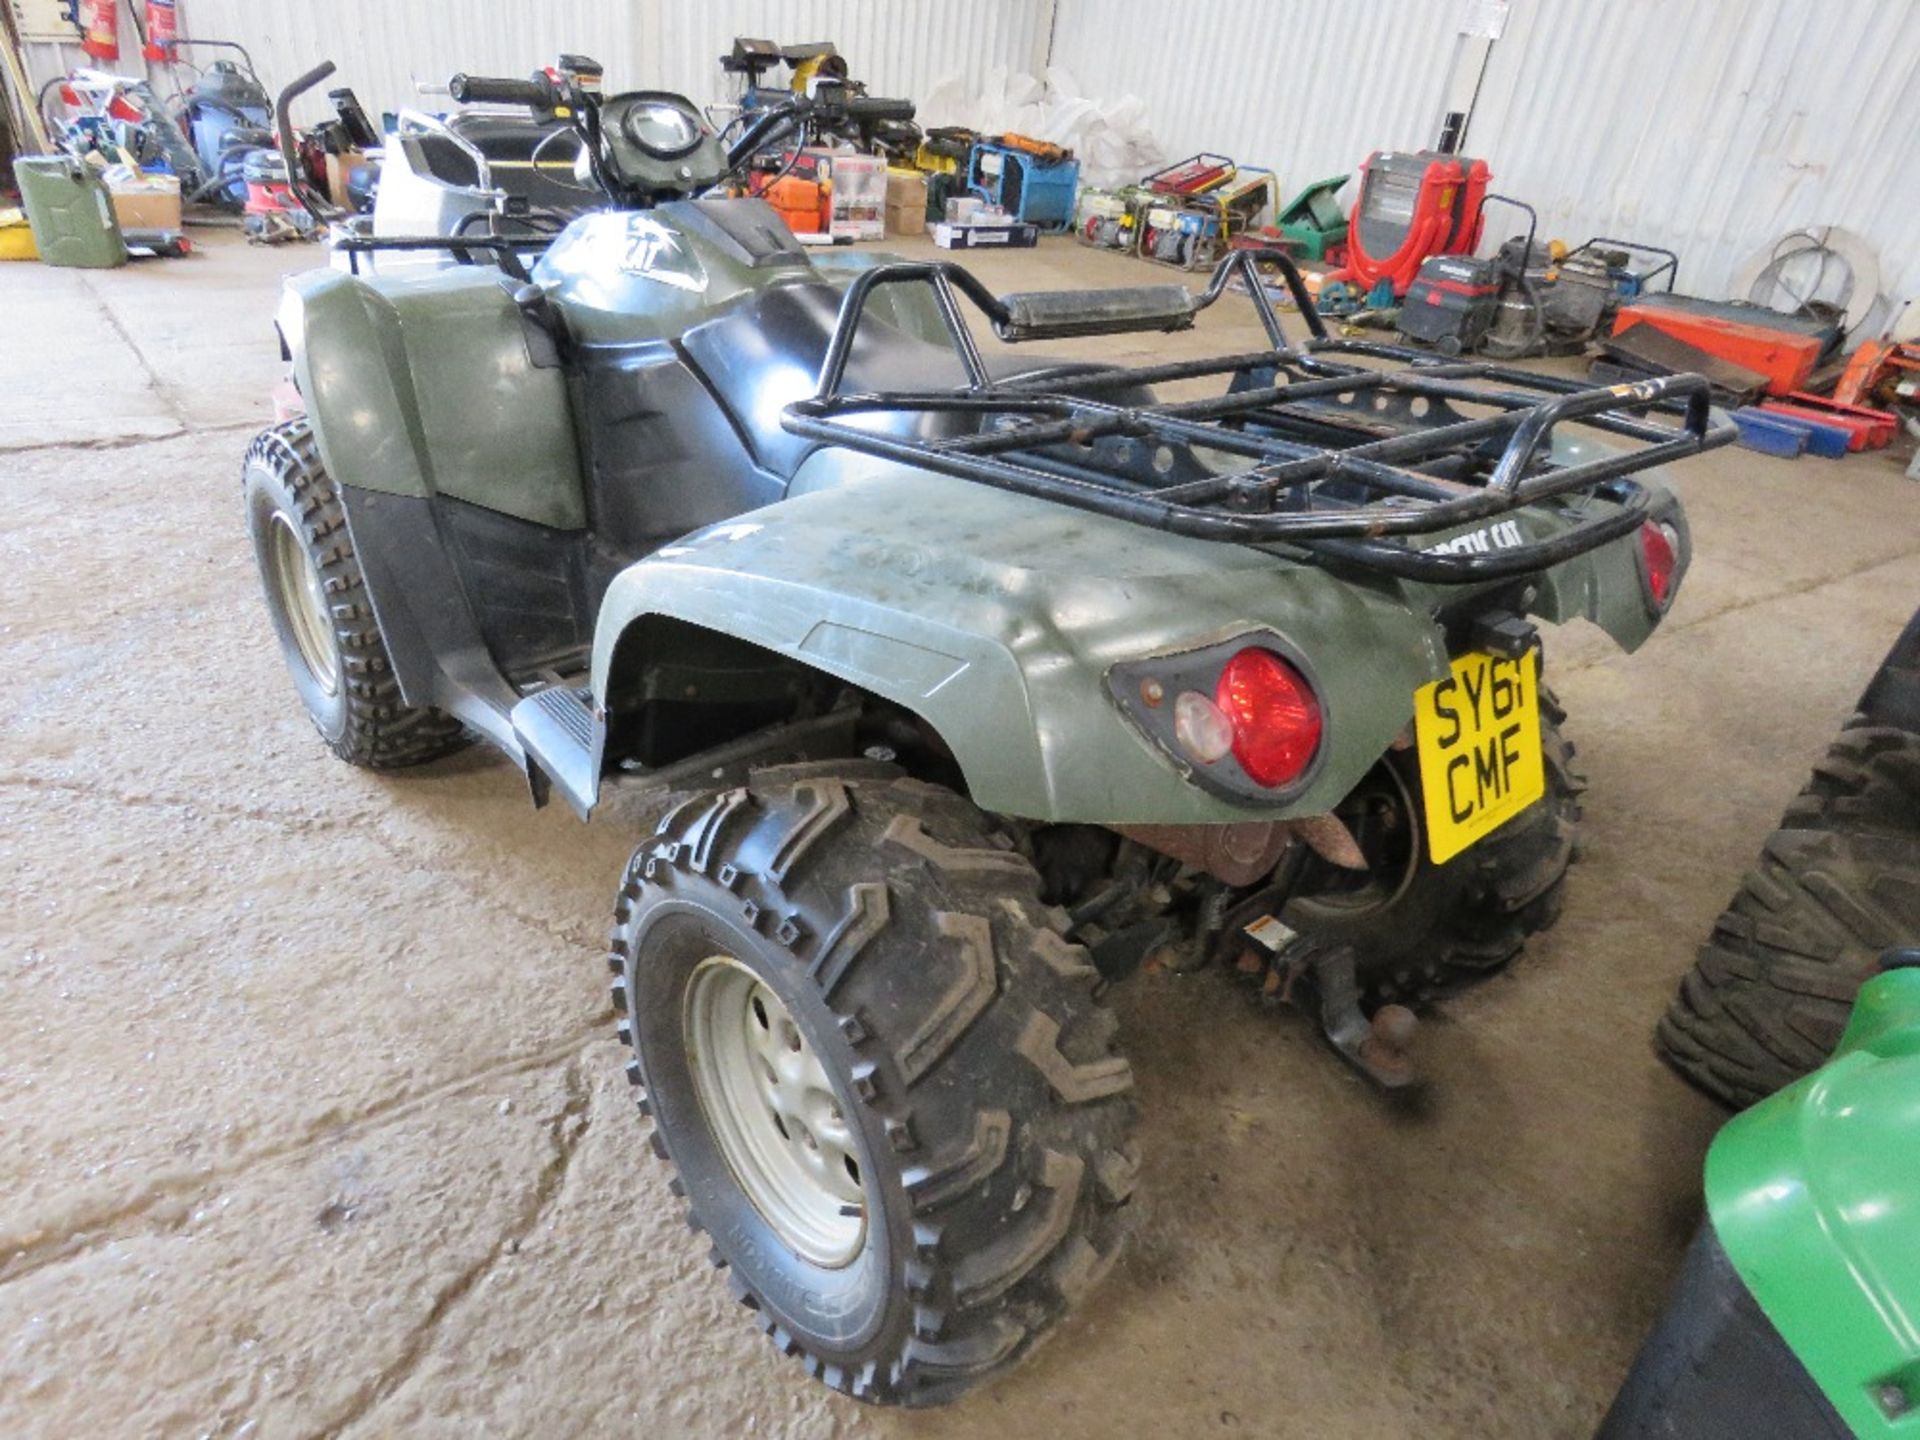 ARTIC CAT DIESEL 700 QUAD BIKE REG:SY61 CMF , WITH WINCH. - Image 5 of 7